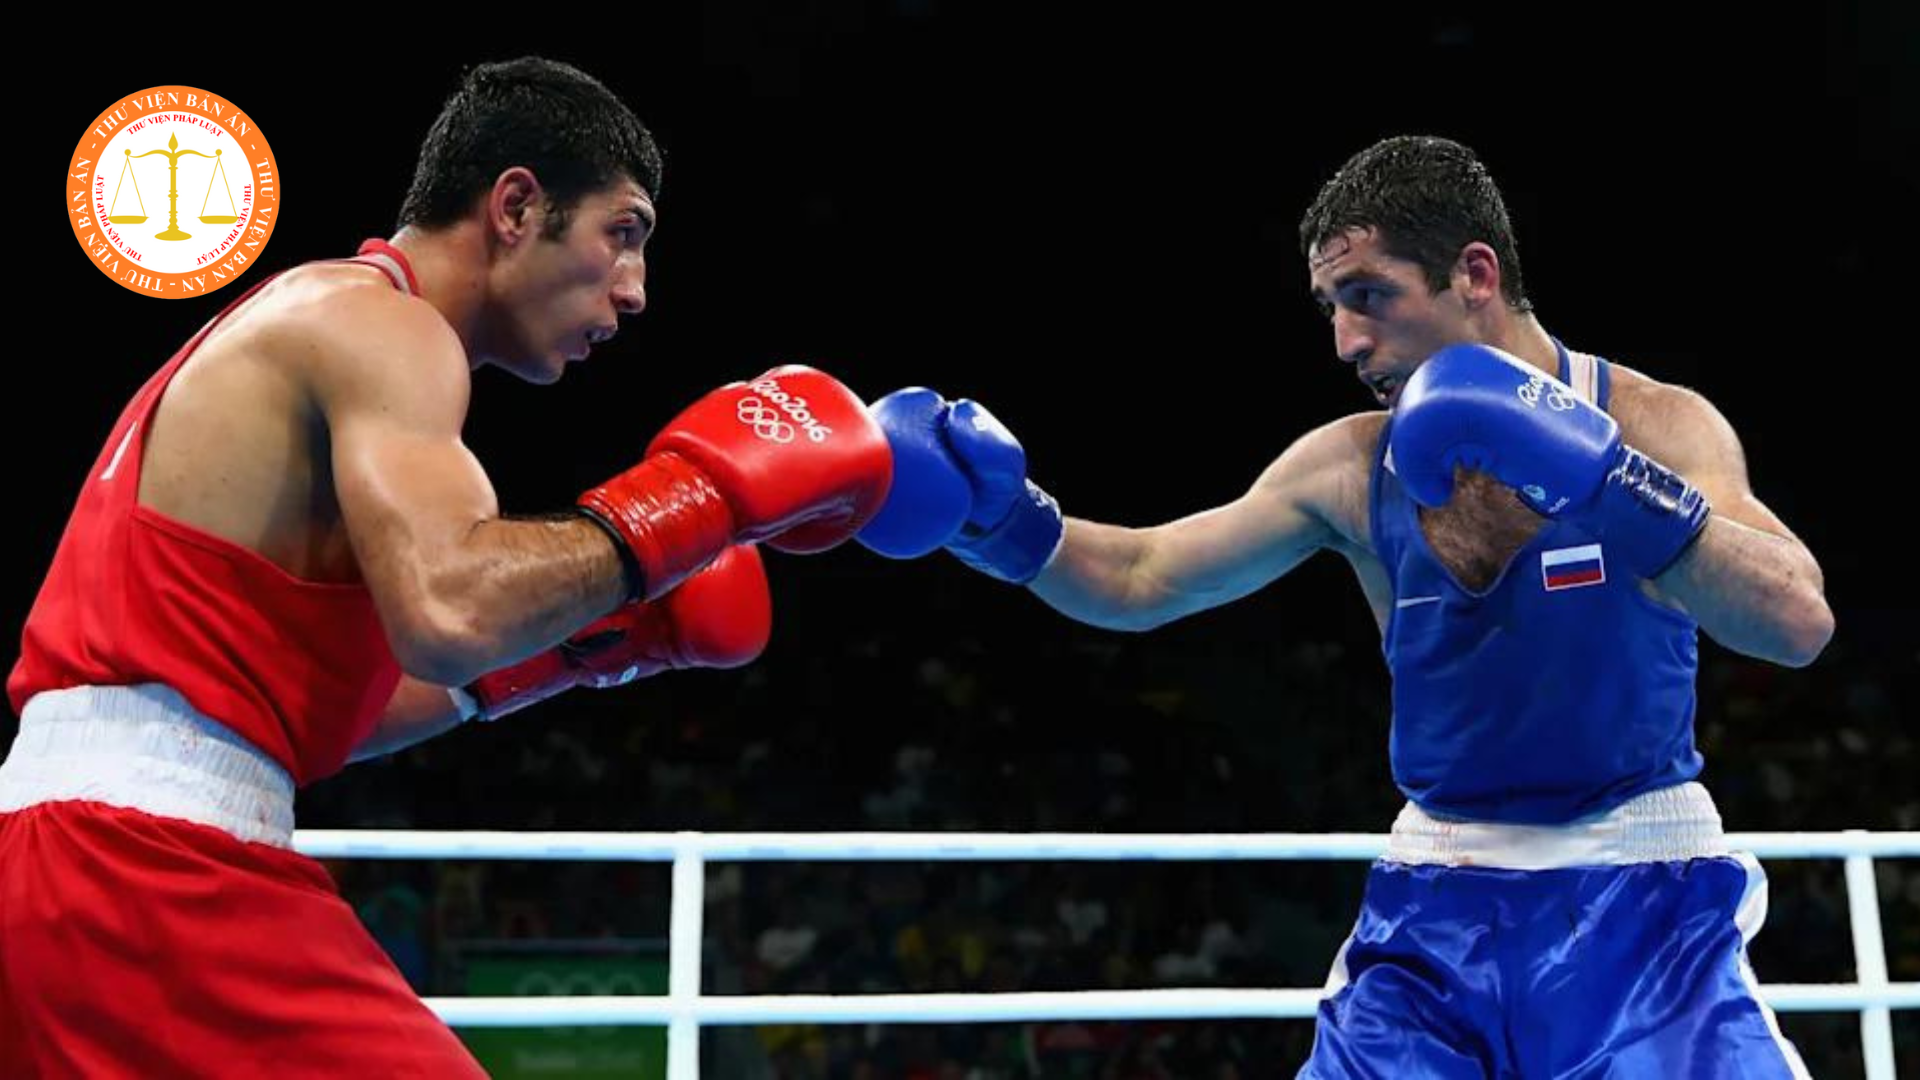 What are the cases where boxers still win even without competing in Vietnam?